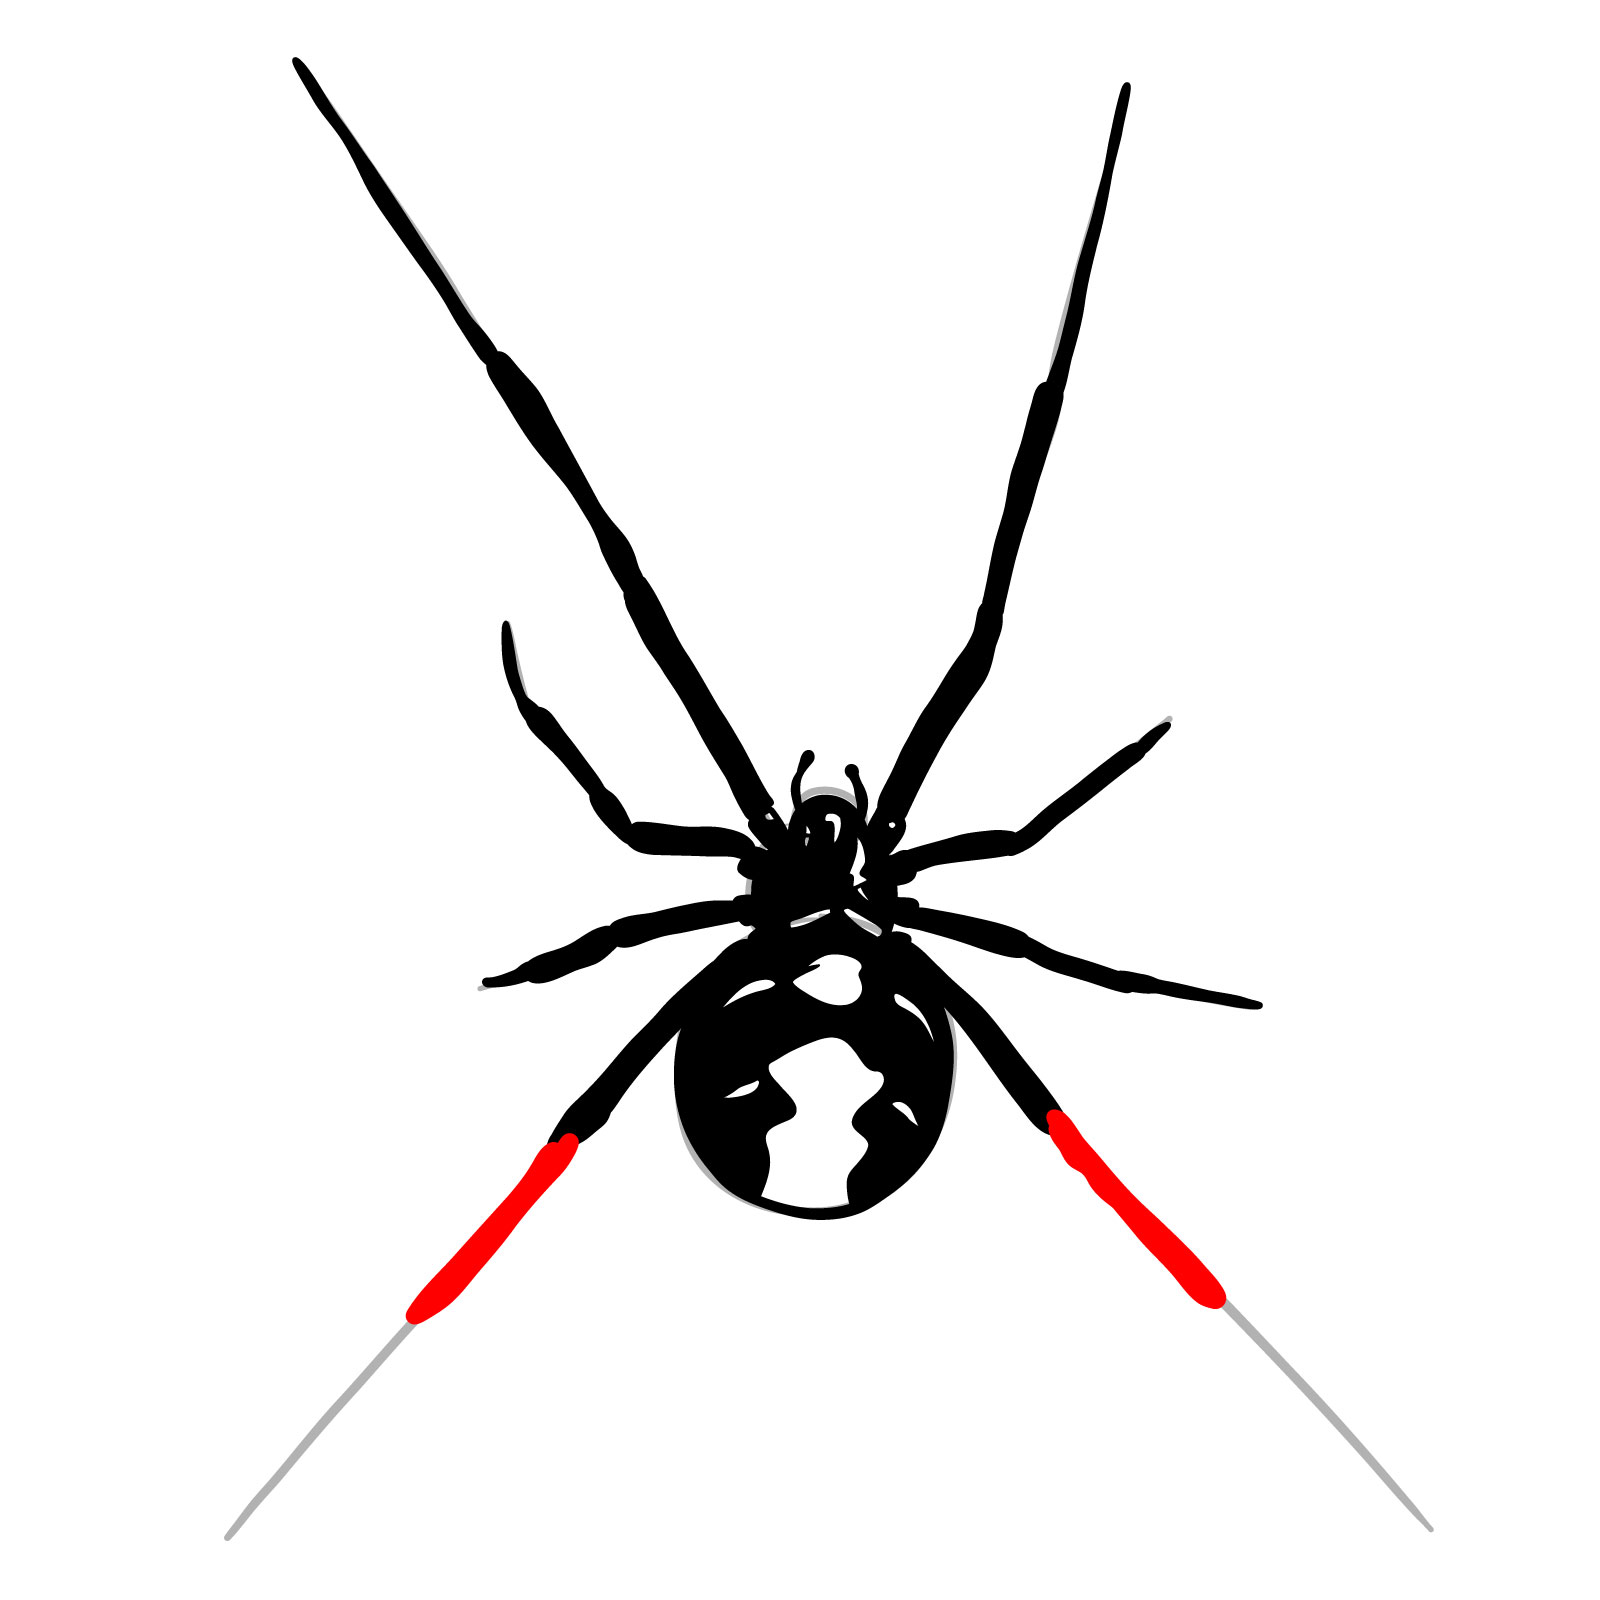 How to draw a Black Widow Spider - step 18